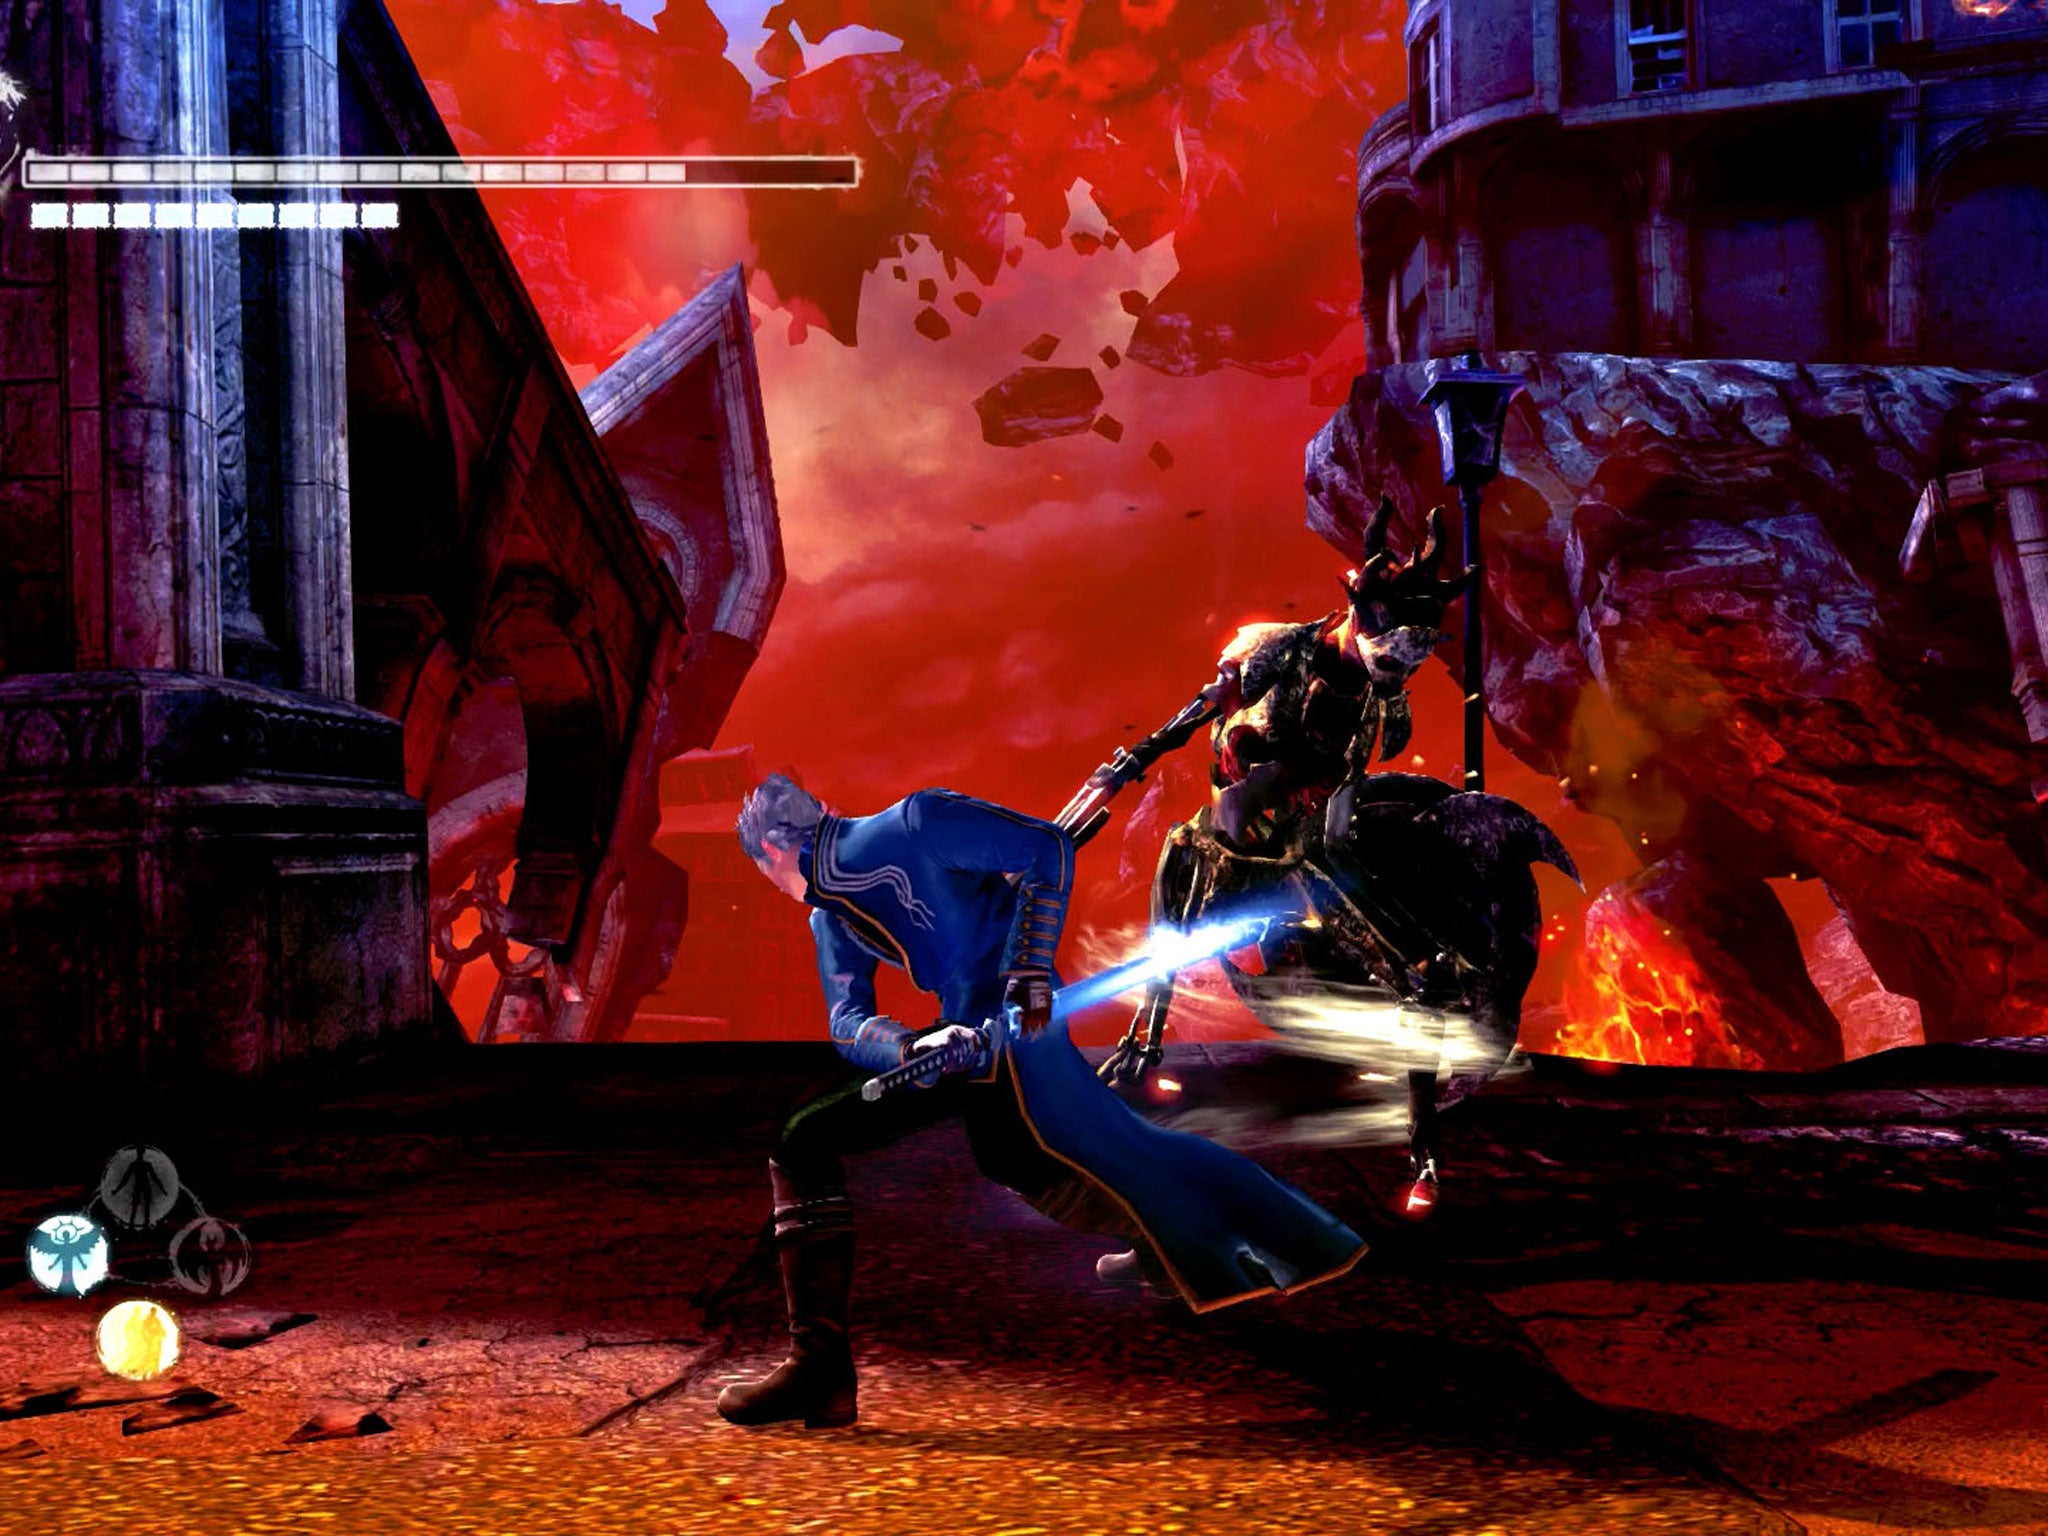 DmC: Devil May Cry Definitive Edition adds a Turbo mode, increasing the game's speed by 20 per cent